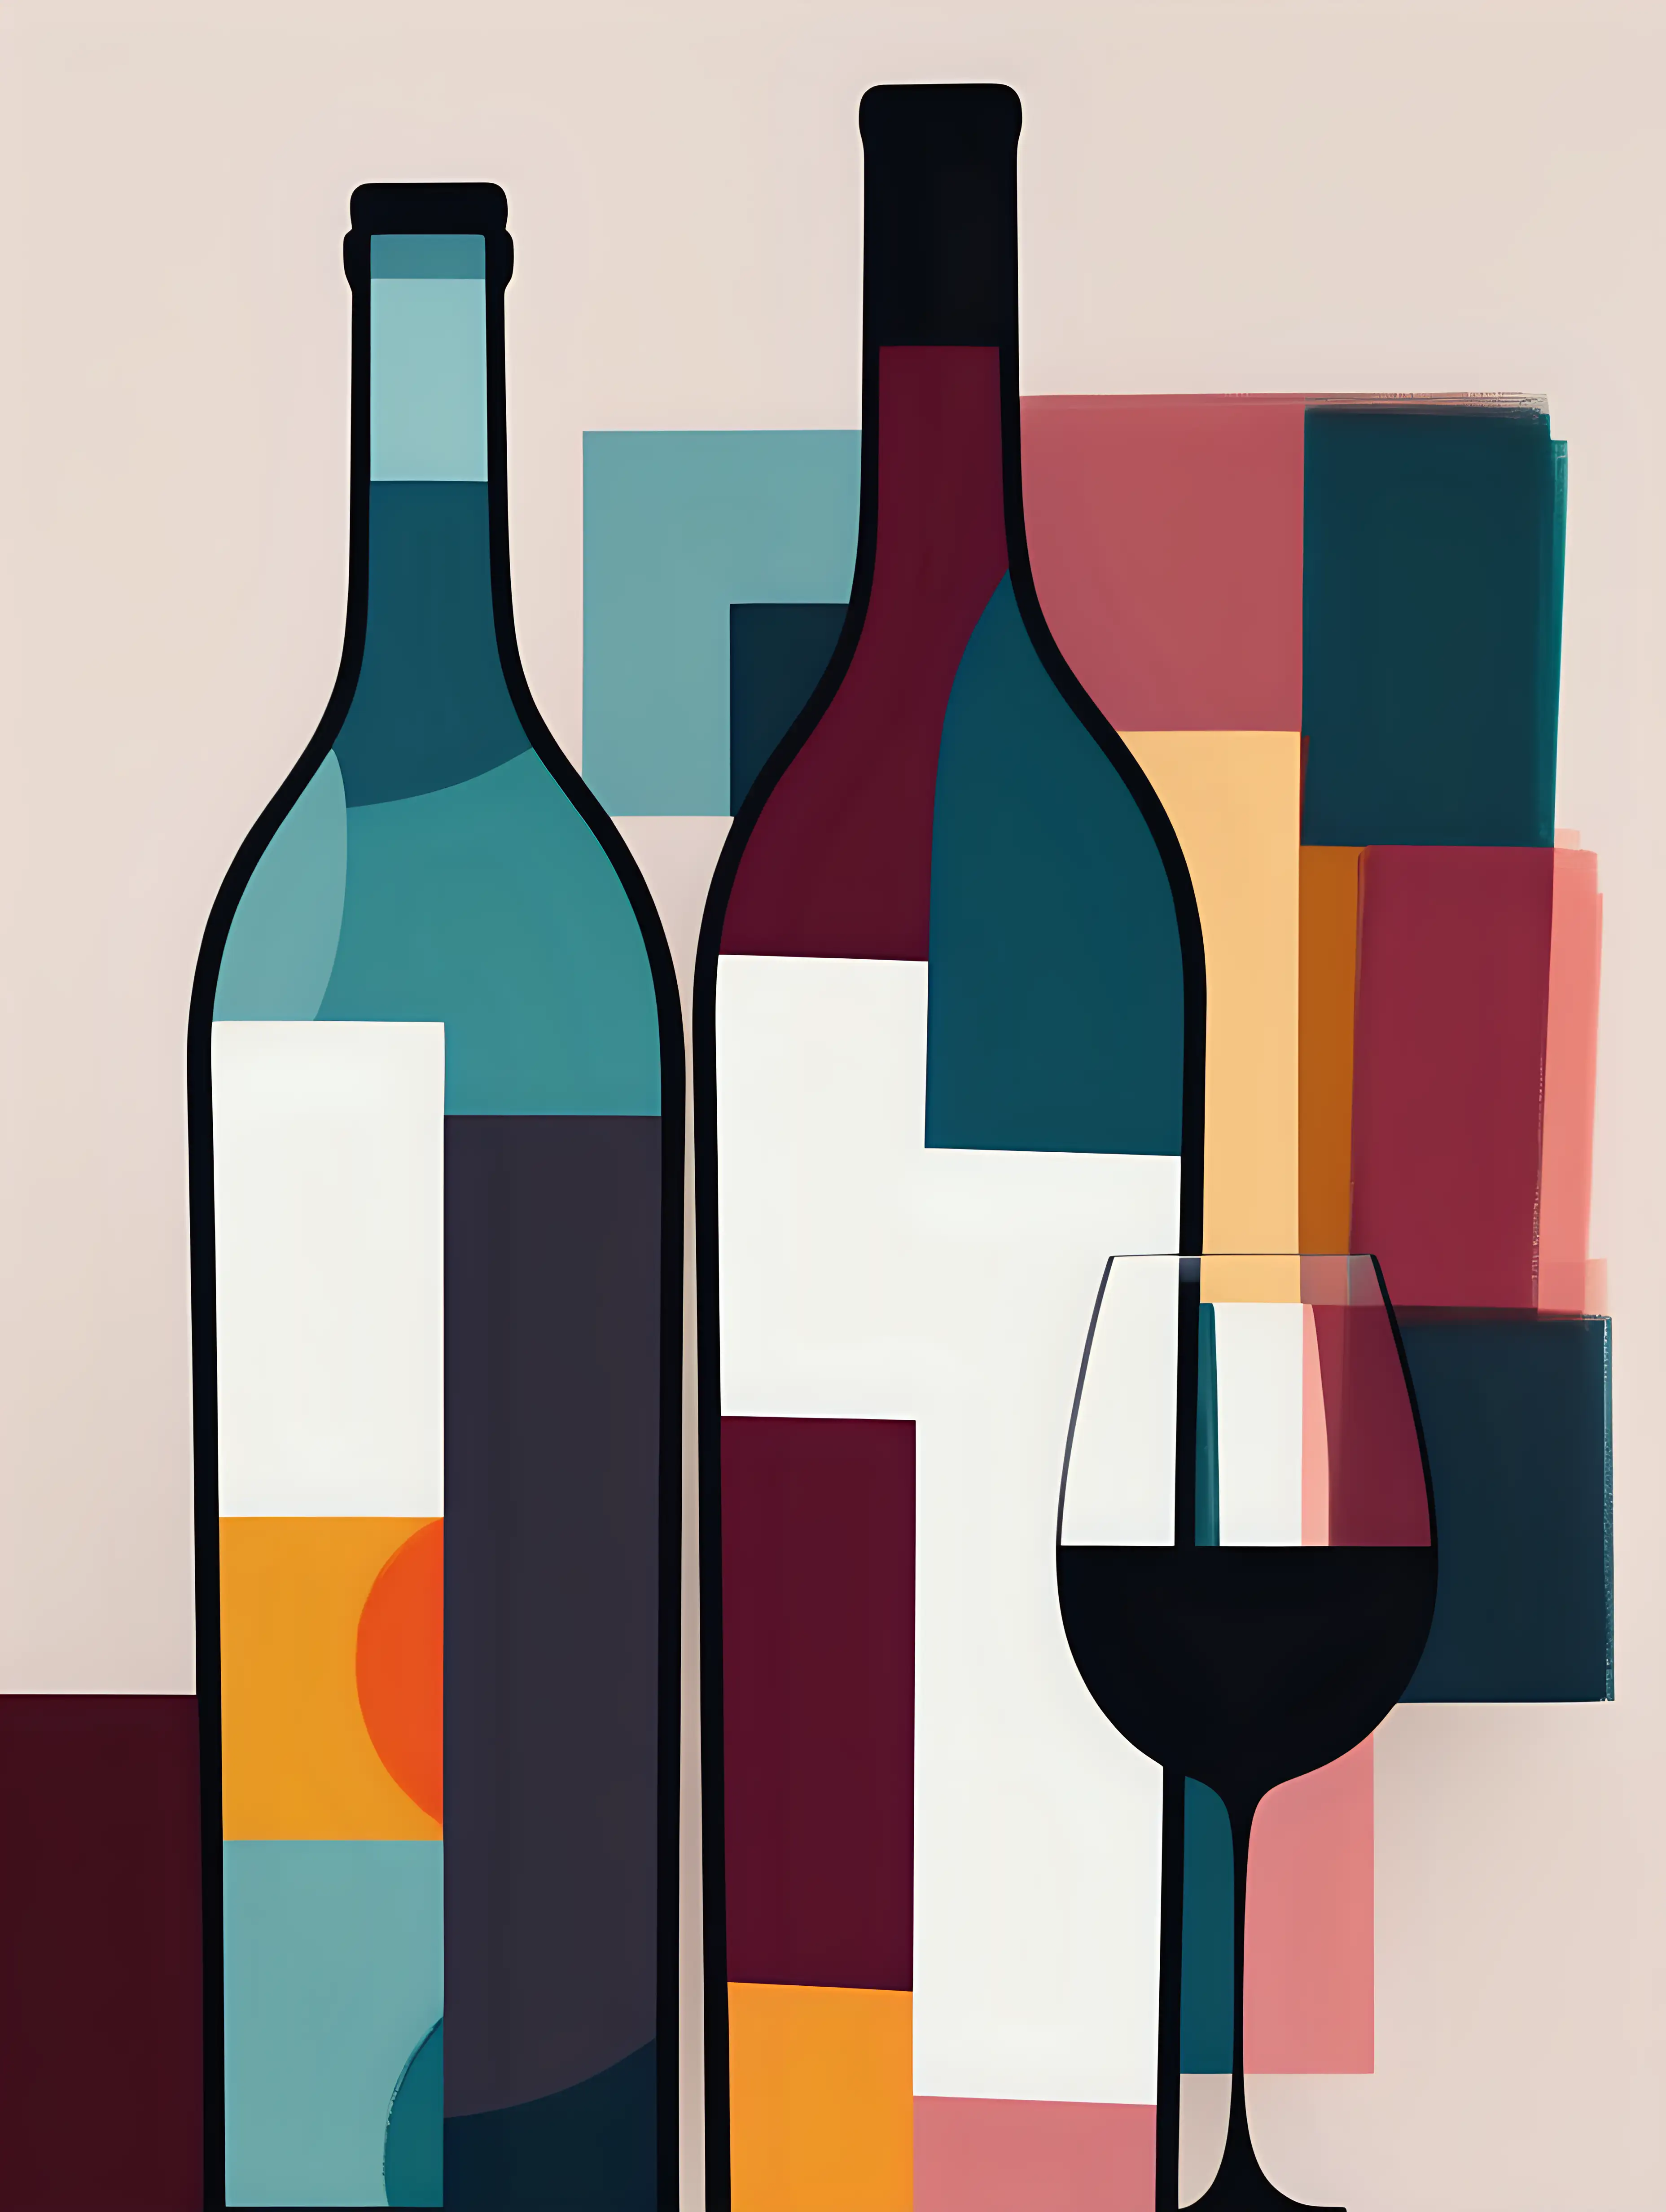 colorful modern art, minimalistic, simple shapes, large strokes. wine and coffee 